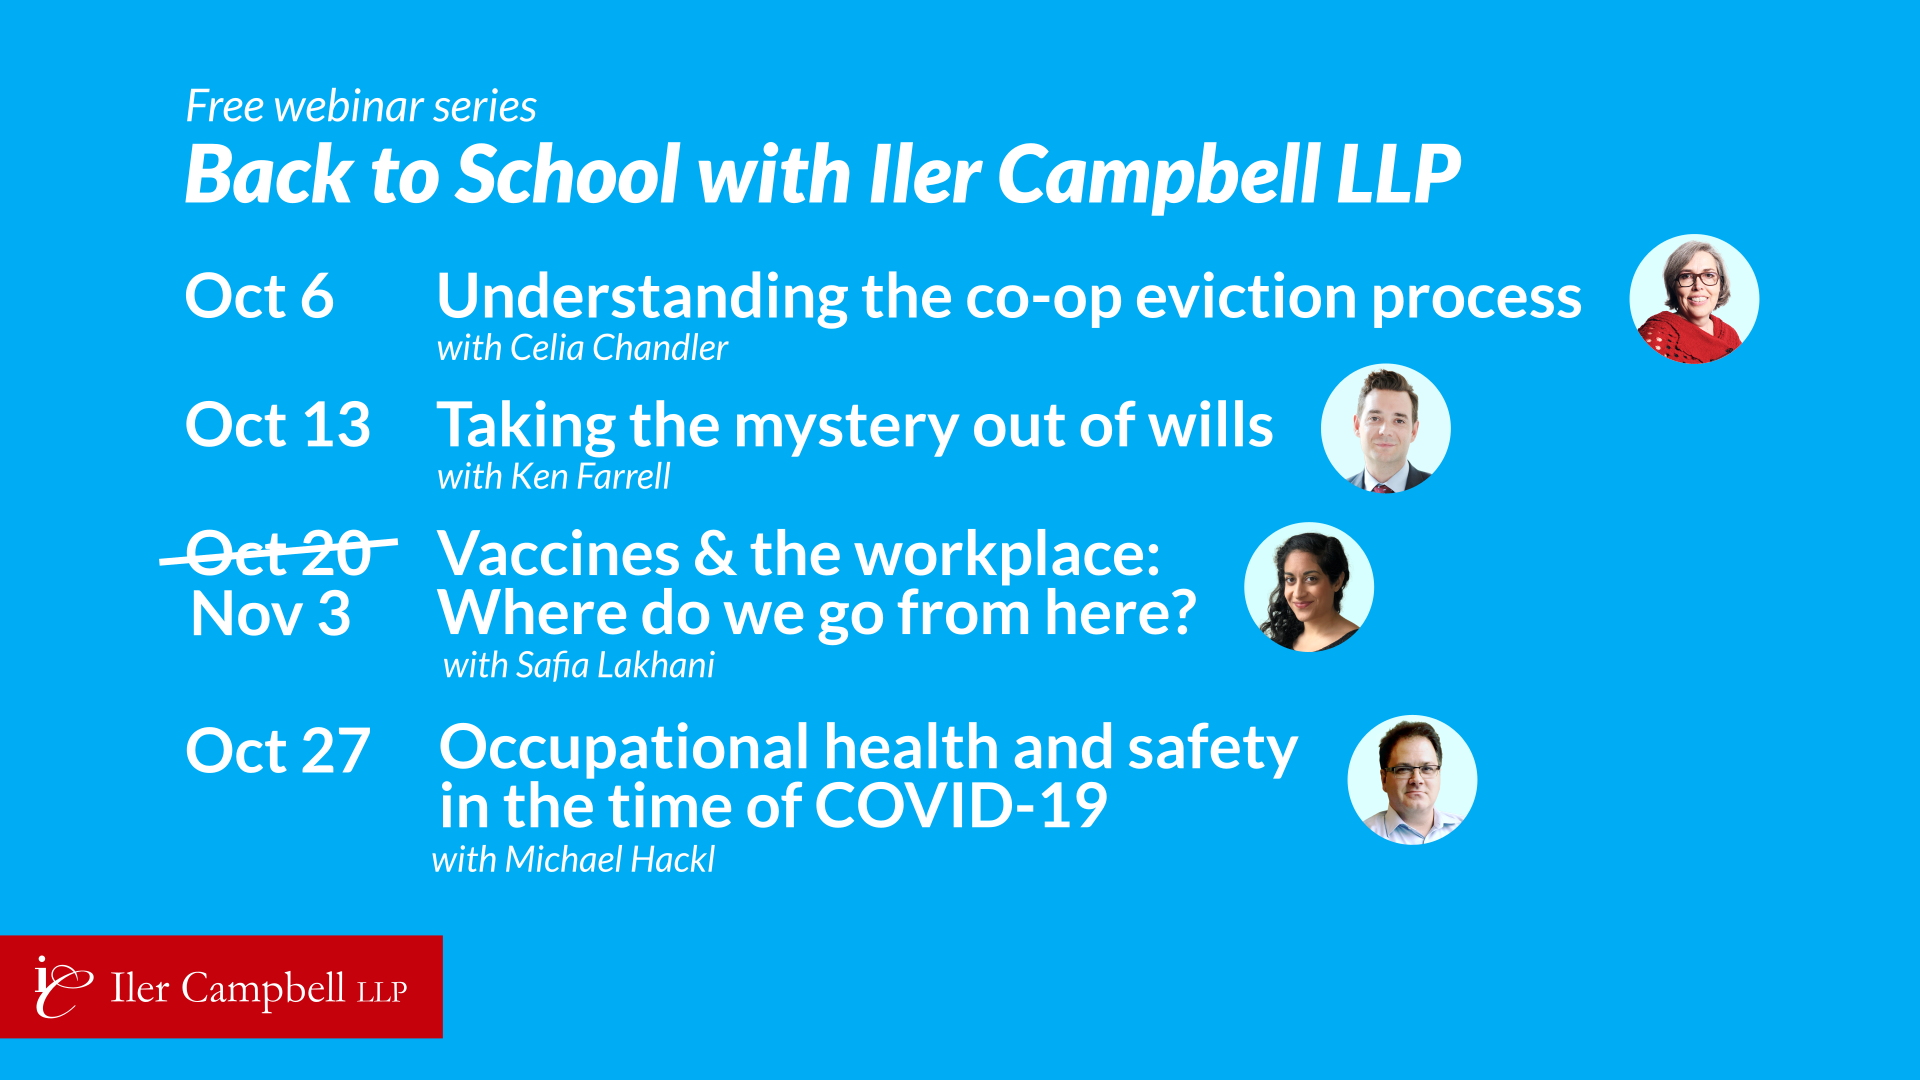 Free webinar series: Back to School with Iler Campbell LLP